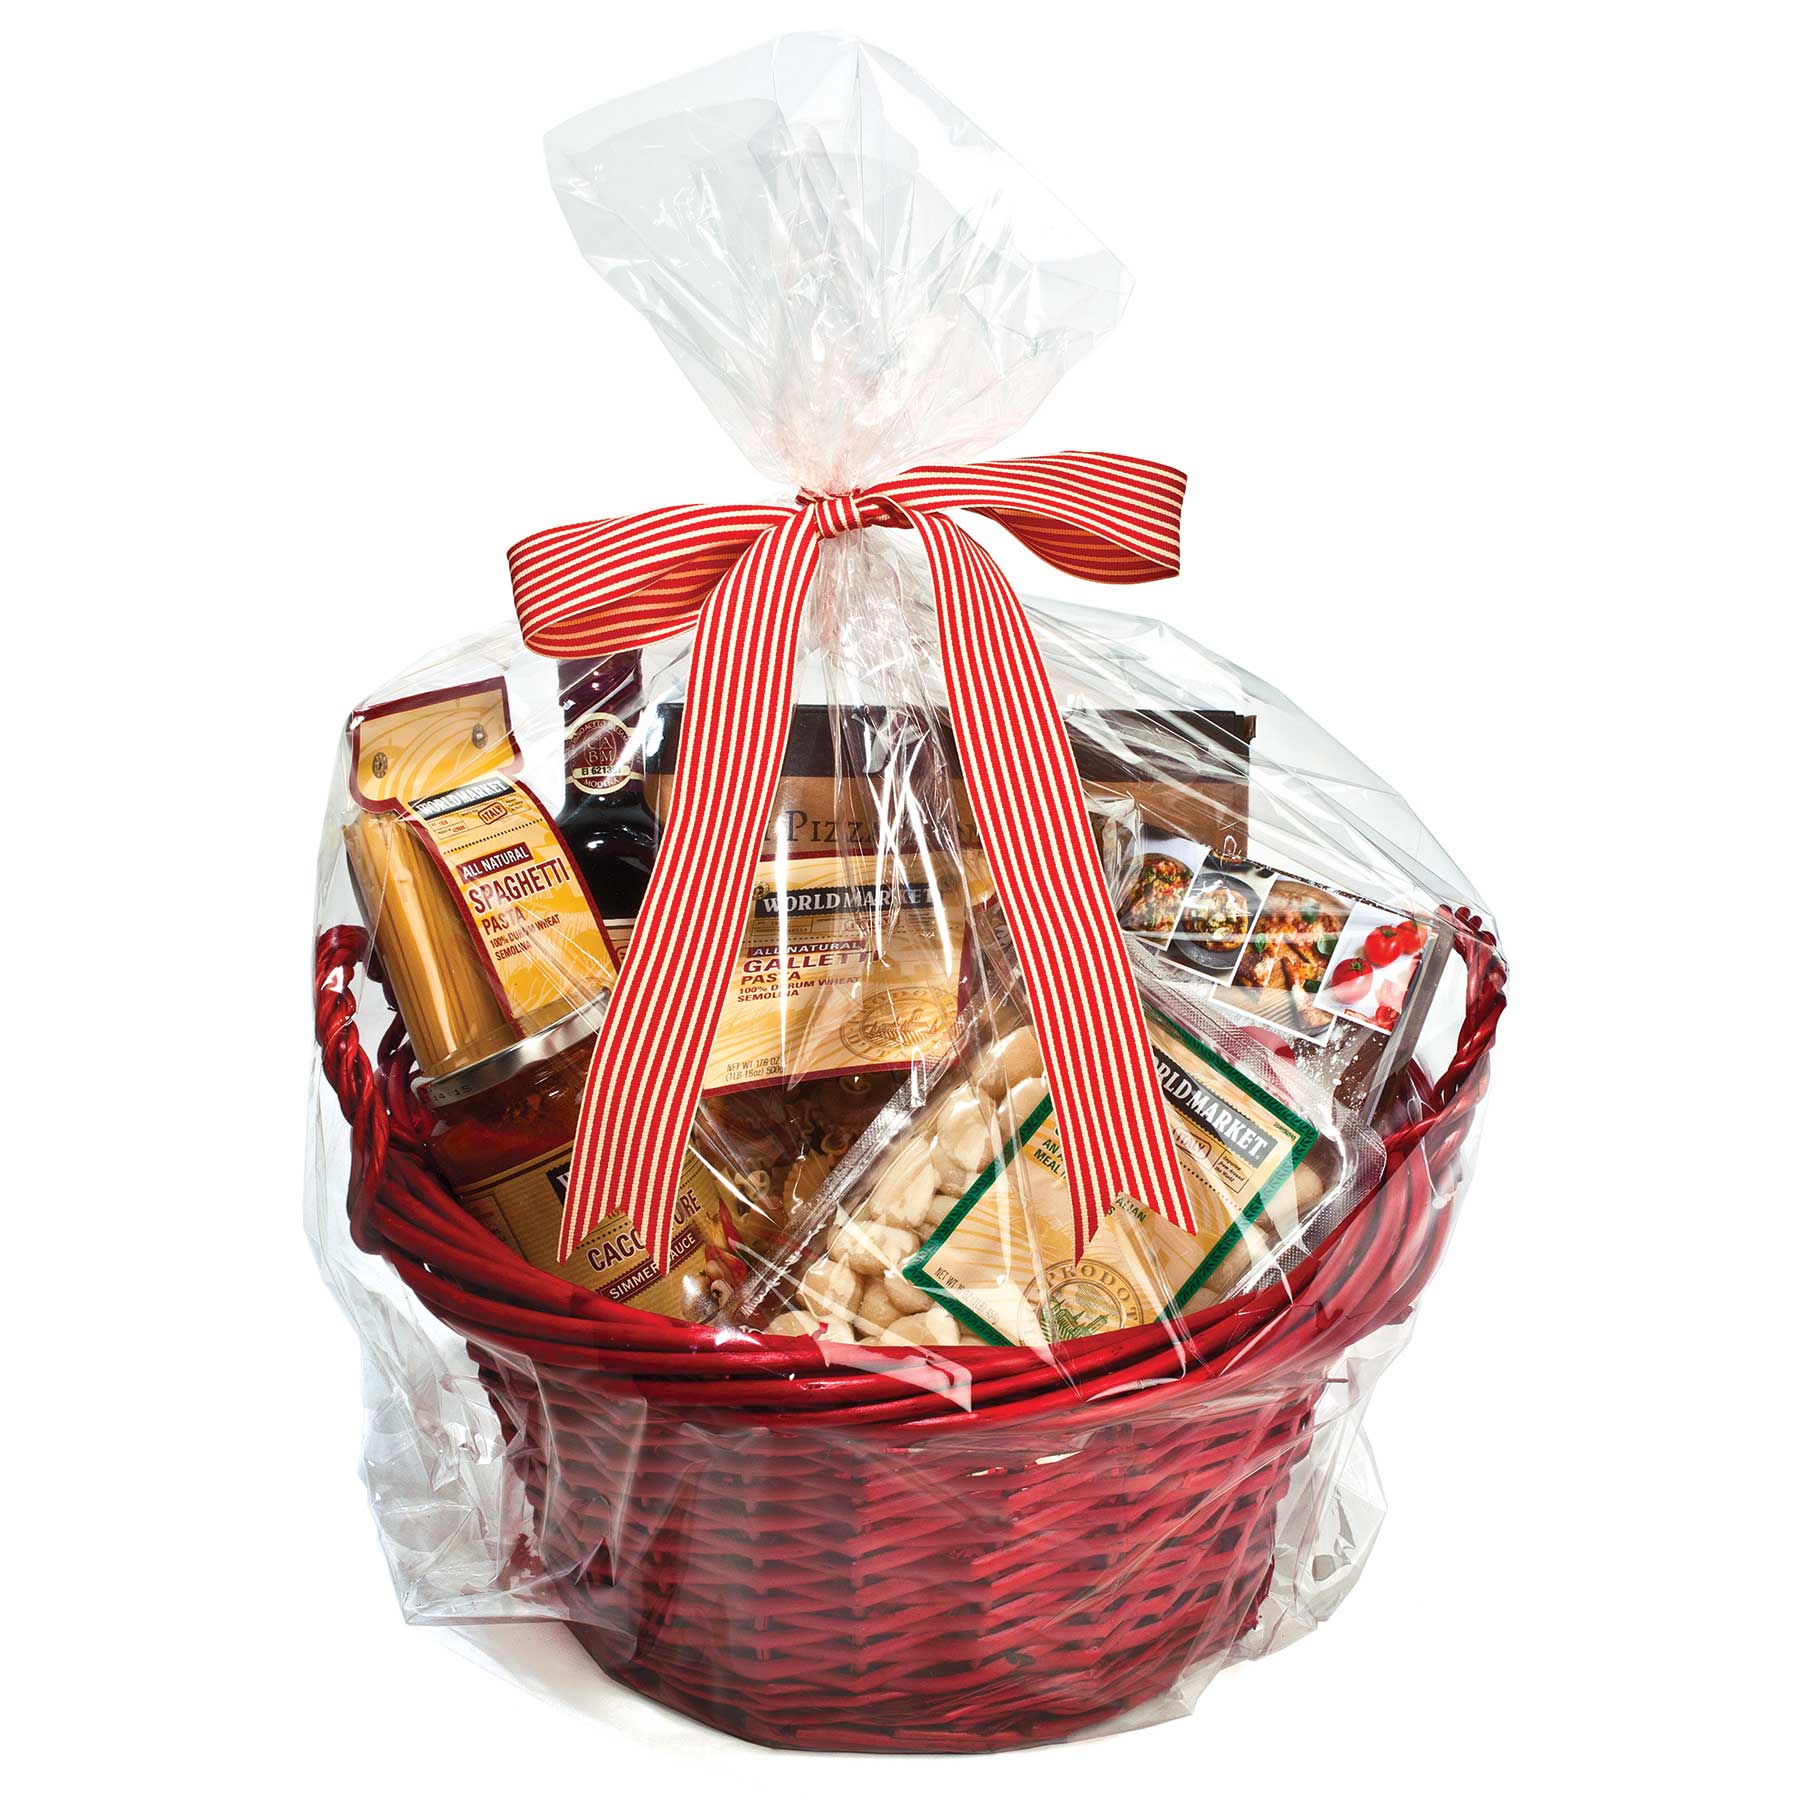 https://clearbags.ca/media/catalog/category/MISCRB-Gift-Basket-Bag-1_1.jpg